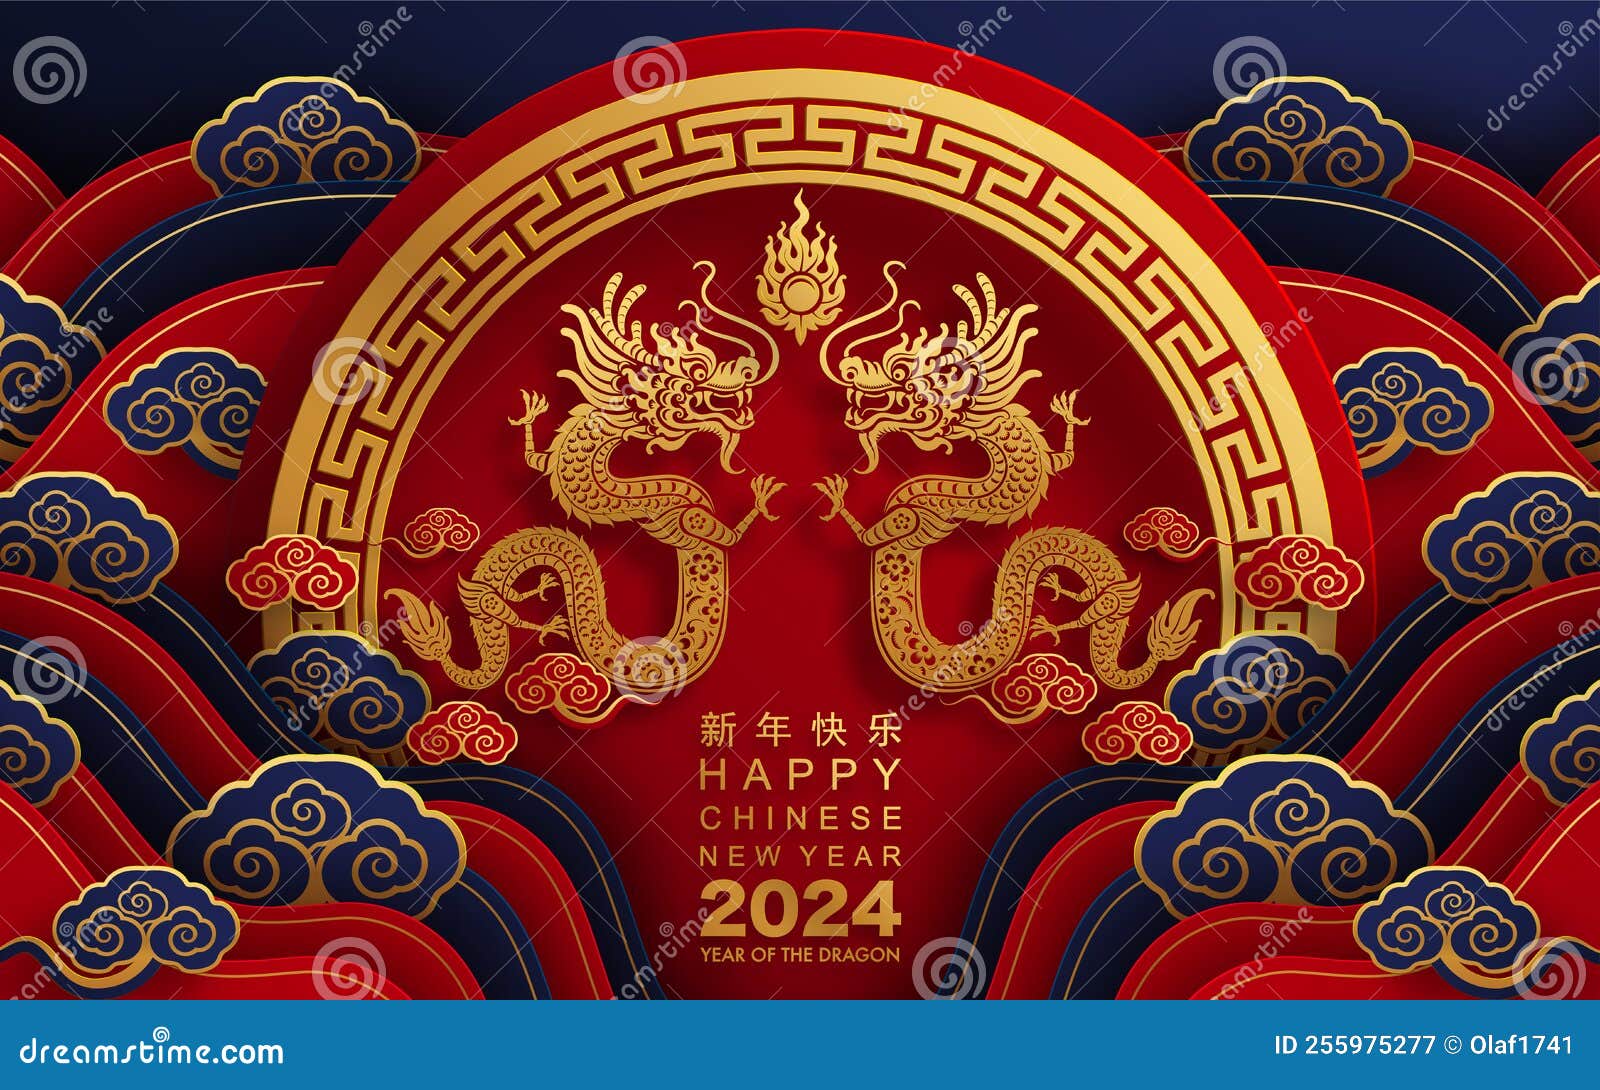 Happy Chinese New Year 2024 Year of the Dragon Zodiac Sign with Flower